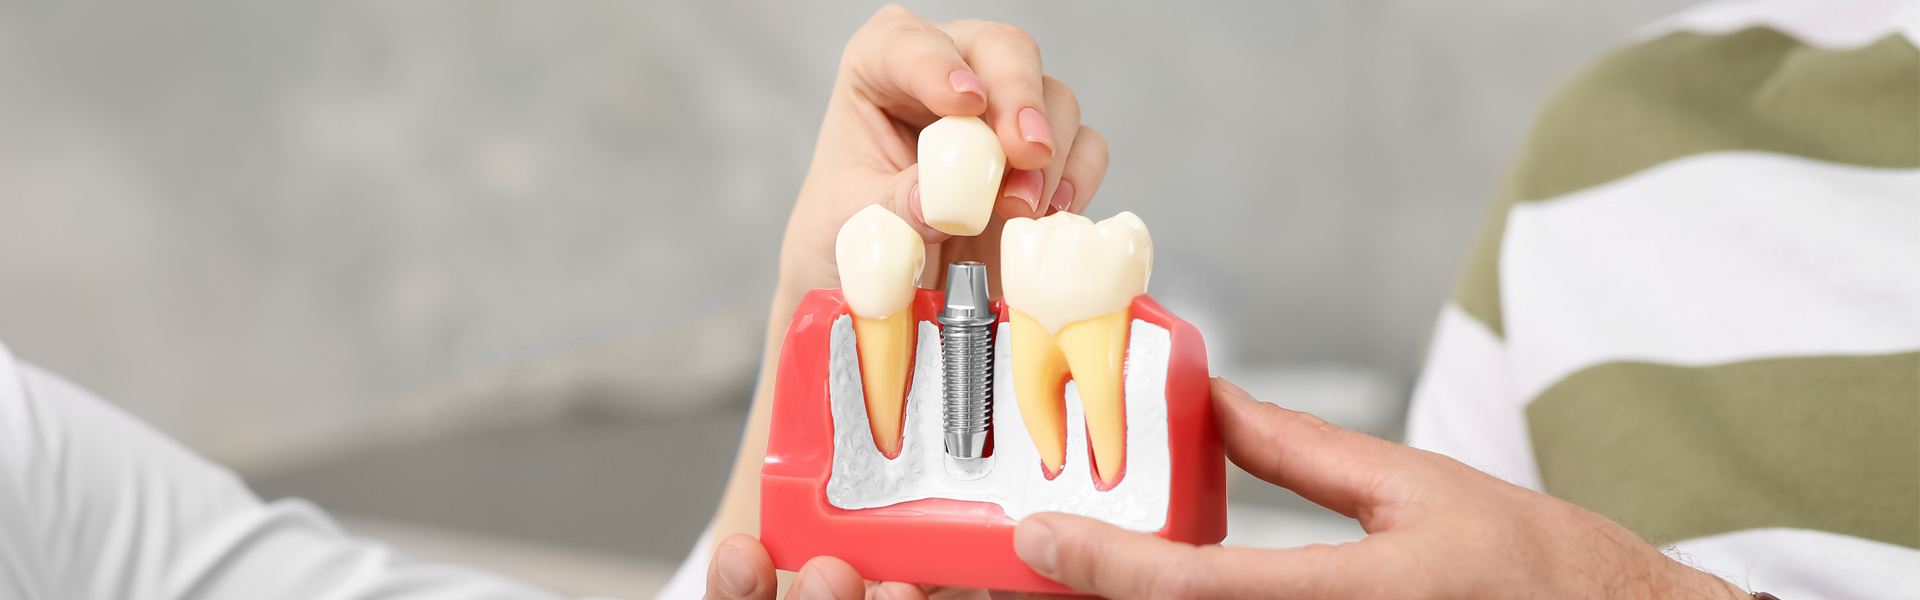 Dental Implant Stages: What to Expect